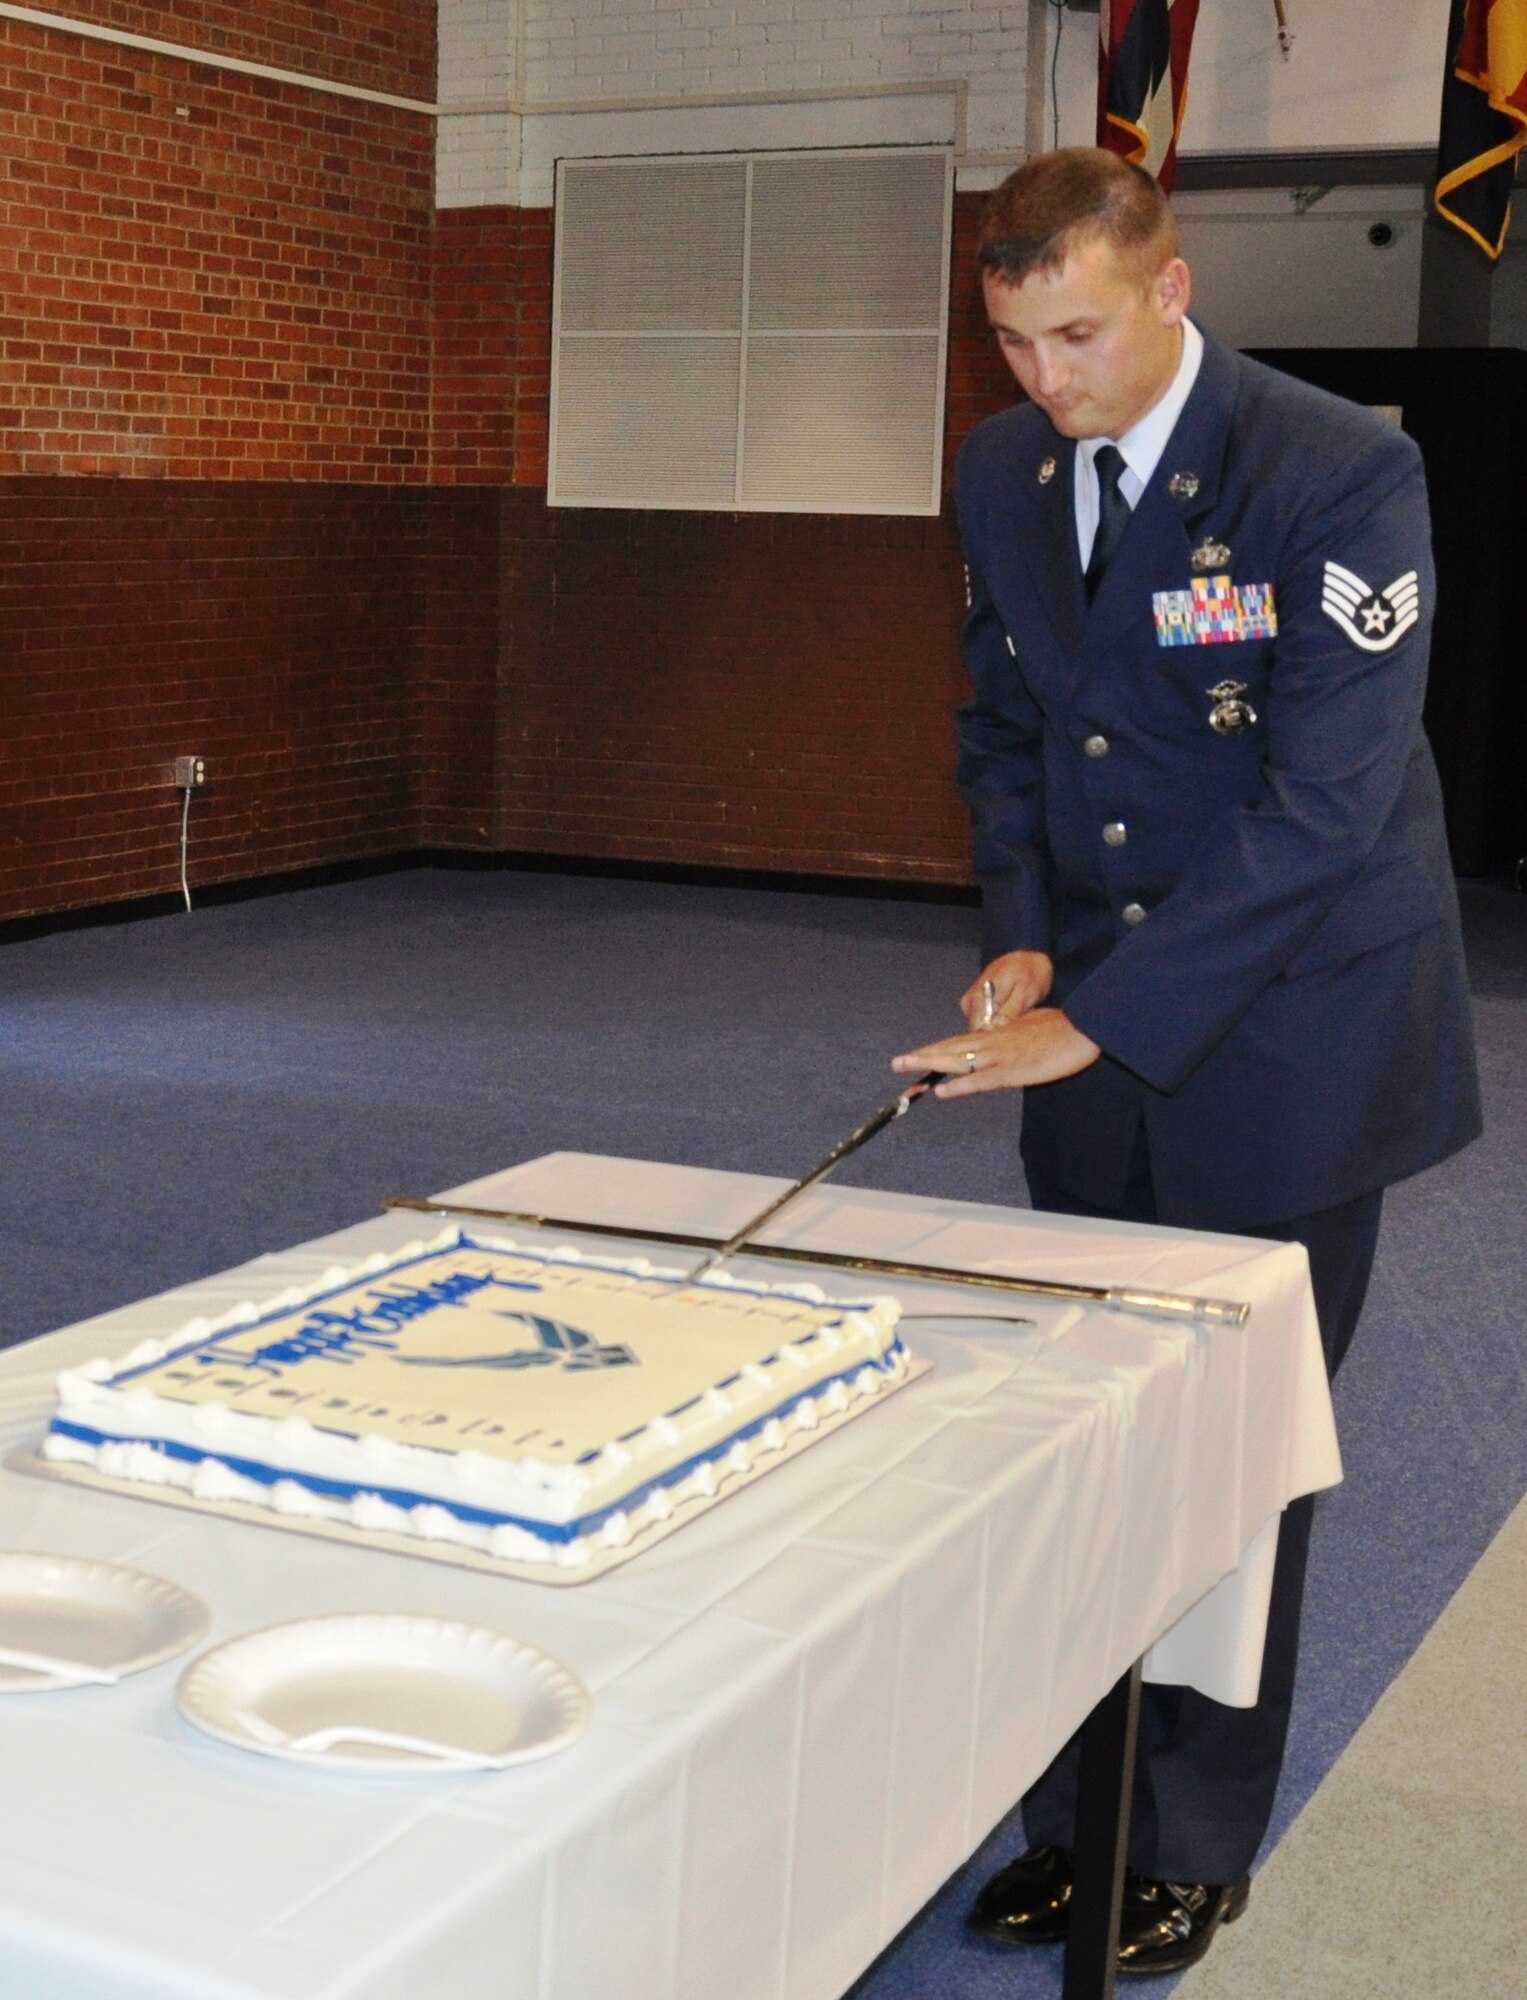 Staff Sgt. Josh Williams, 90th Security Support Squadron and Base Honor Guard member, ceremoniously cuts the Air Force Birthday Cake during the celebration of the Air Force’s 65th birthday at the Fall Hall Community Center on F. E. Warren Air Force Base, Wyo., Sept. 16. As is tradition, the youngest enlisted Airman, Airman John Baker, 90th Communications Squadron; the longest-serving civilian, Elaine Hart, 90th Missile Wing Legal Office; and Col. George Farfour, 90th Missile Wing vice commander,  receive the first pieces of the cake to commemorate the Air Force Birthday. (U.S. Air Force photo/Staff Sgt. Torri Savarese) 